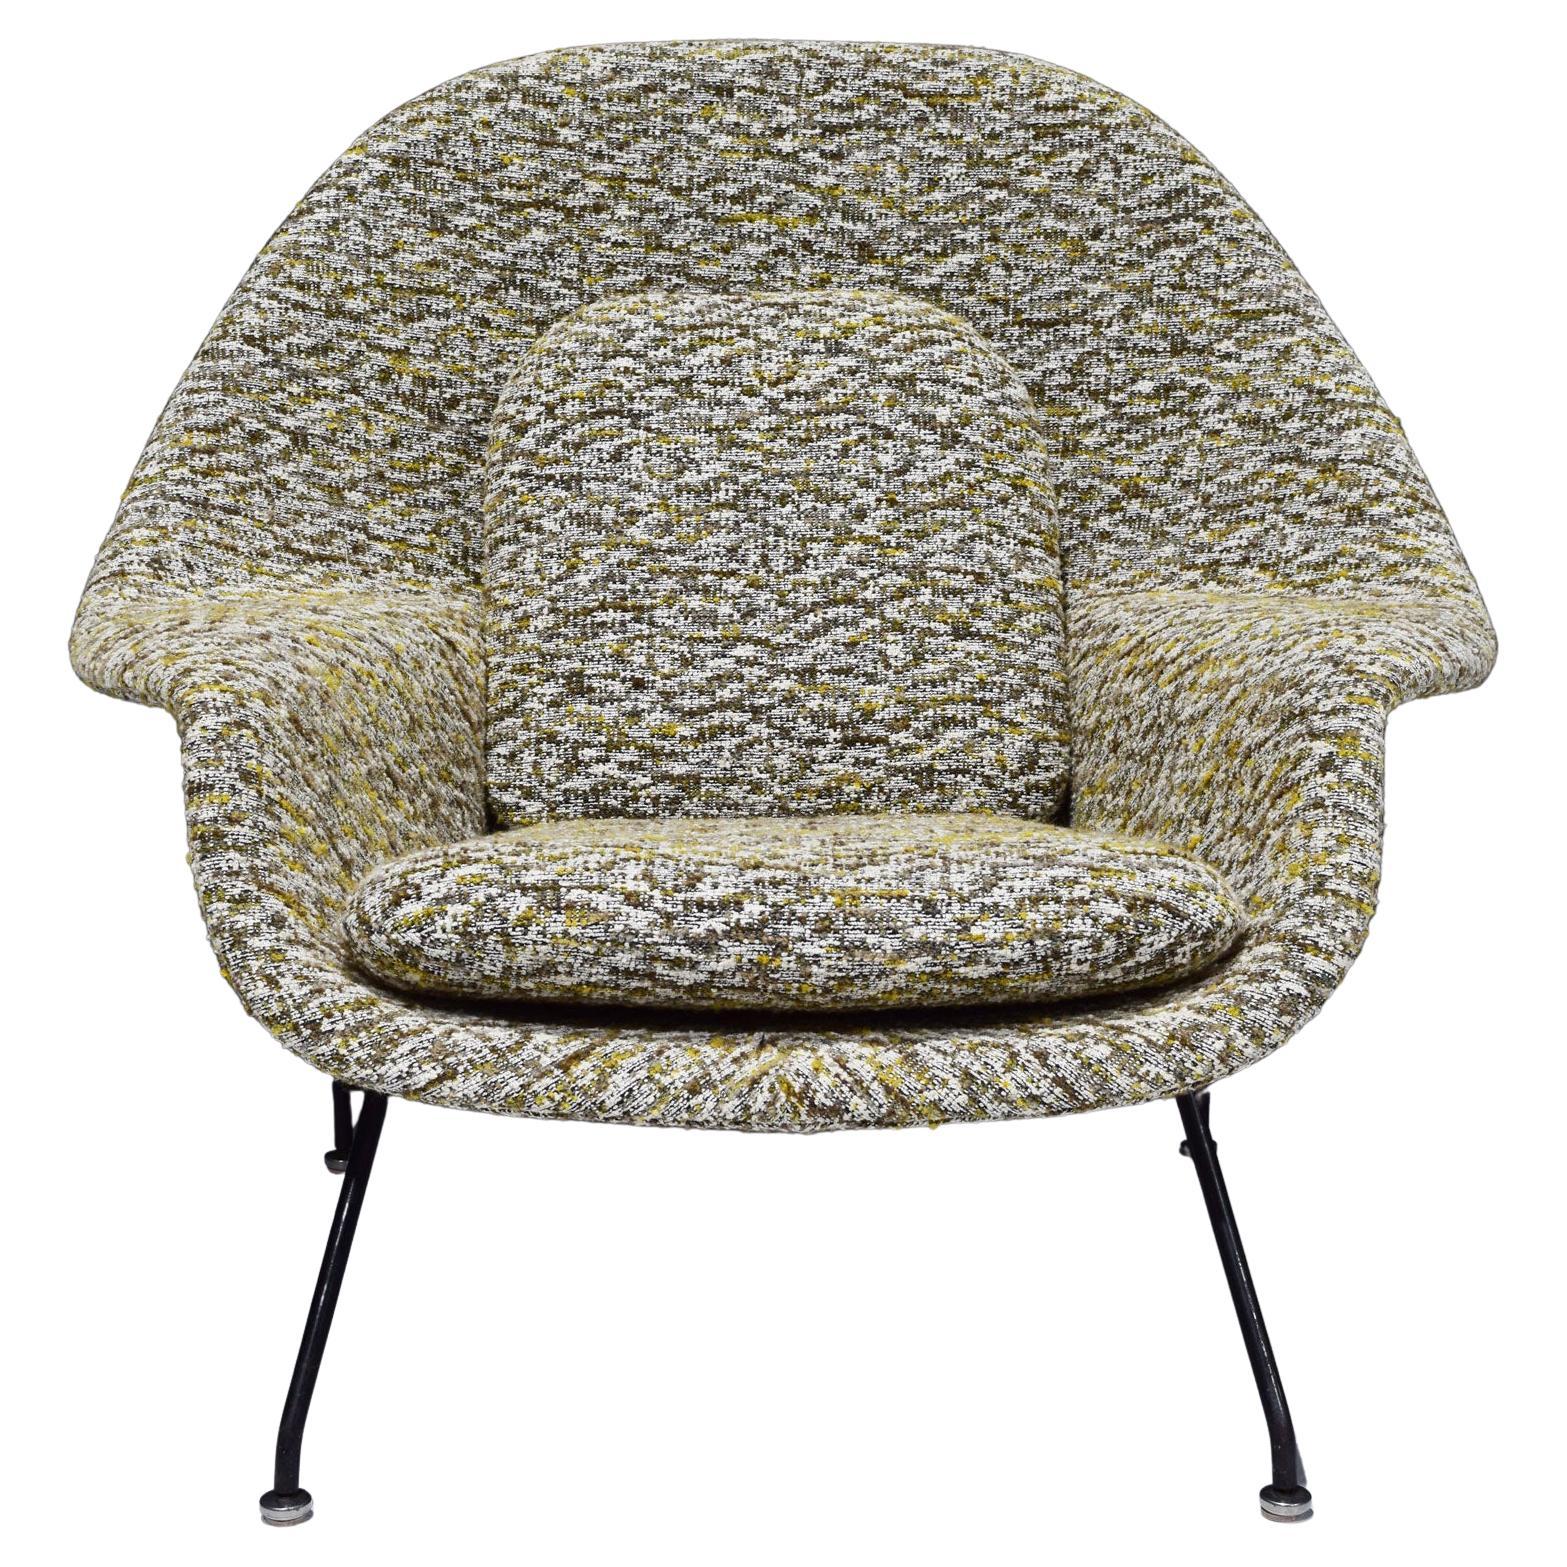 Eero Saarinen for Knoll Womb Chair is French Boucle